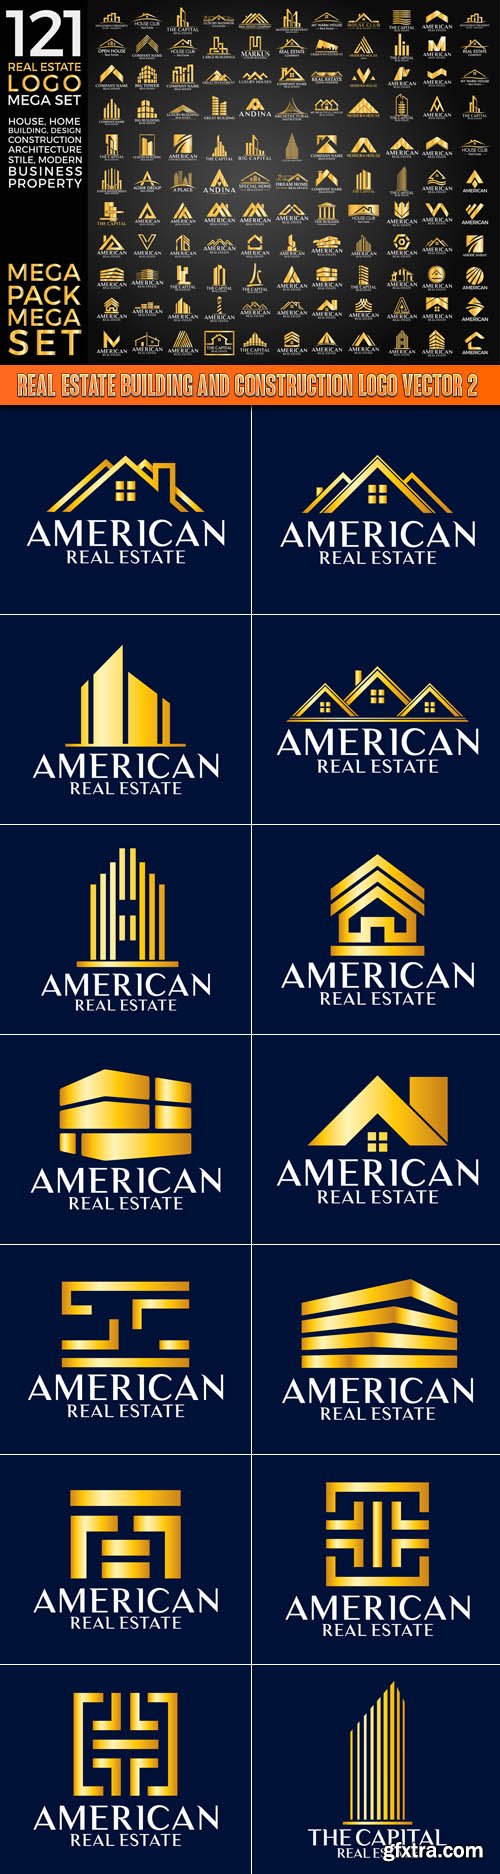 Real Estate Building and Construction Logos Vector 2